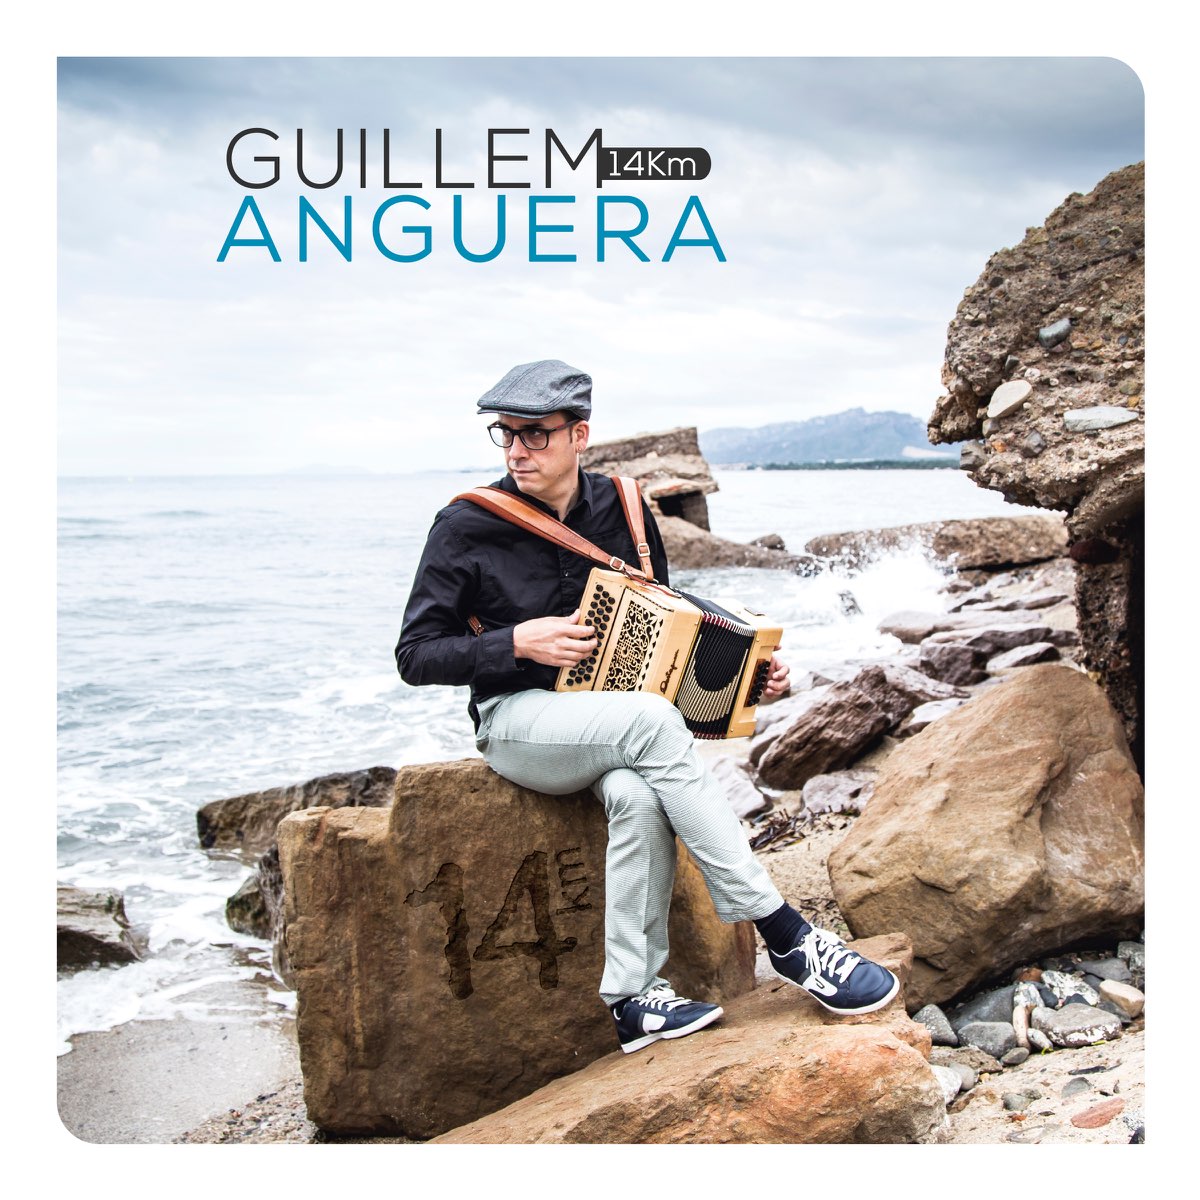 14 Km by Guillem Anguera on Apple Music